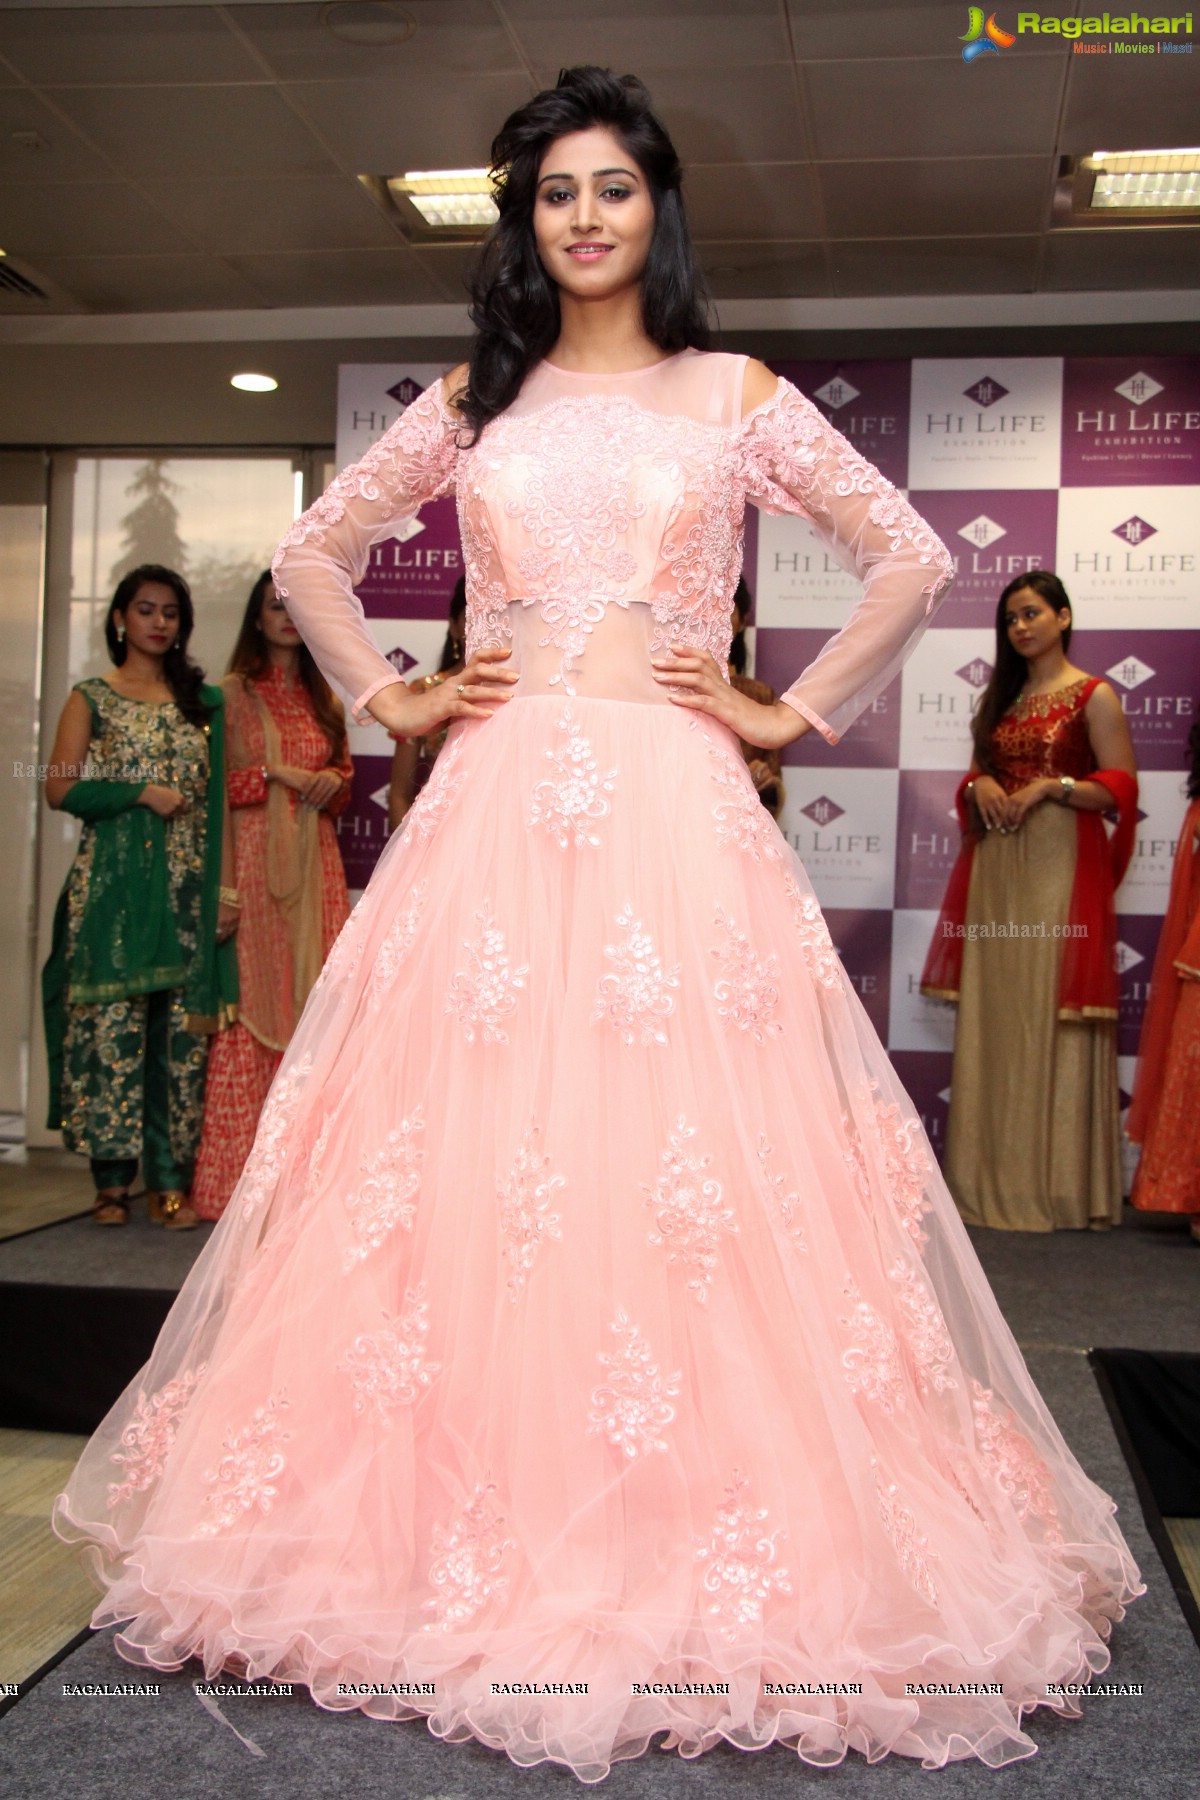 A Grand Fashion Showcase at The Pre-Launch of Hi-Life Luxury Exhibition at HICC, Novotel, Hyderabad